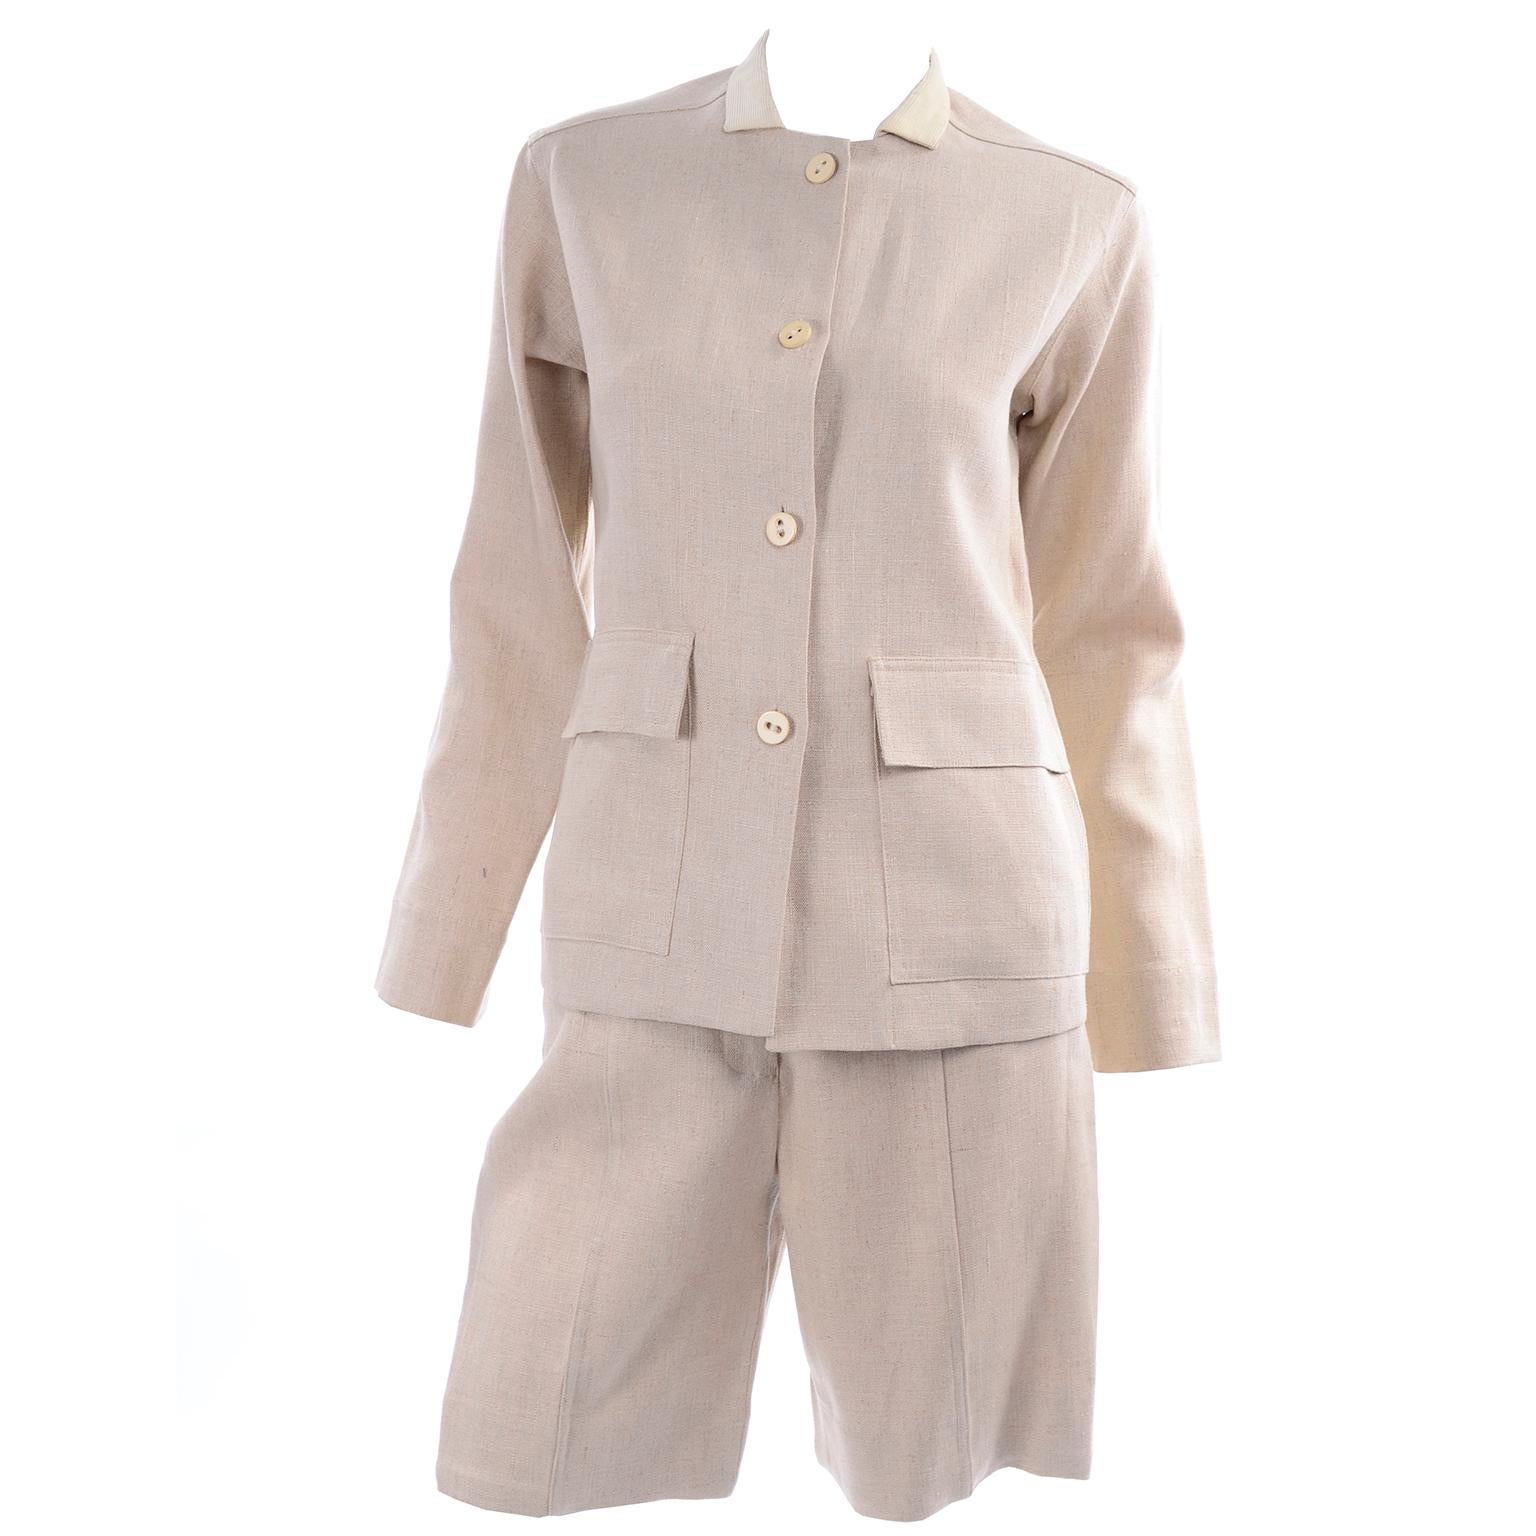 This 1950's Bill Atkinson vintage linen 2 piece short outfit looks as if it was never worn.   The linen fabric is outstanding and it is unbelievable that this ensemble was designed almost 70 years ago!   The high waisted shorts have  side slit